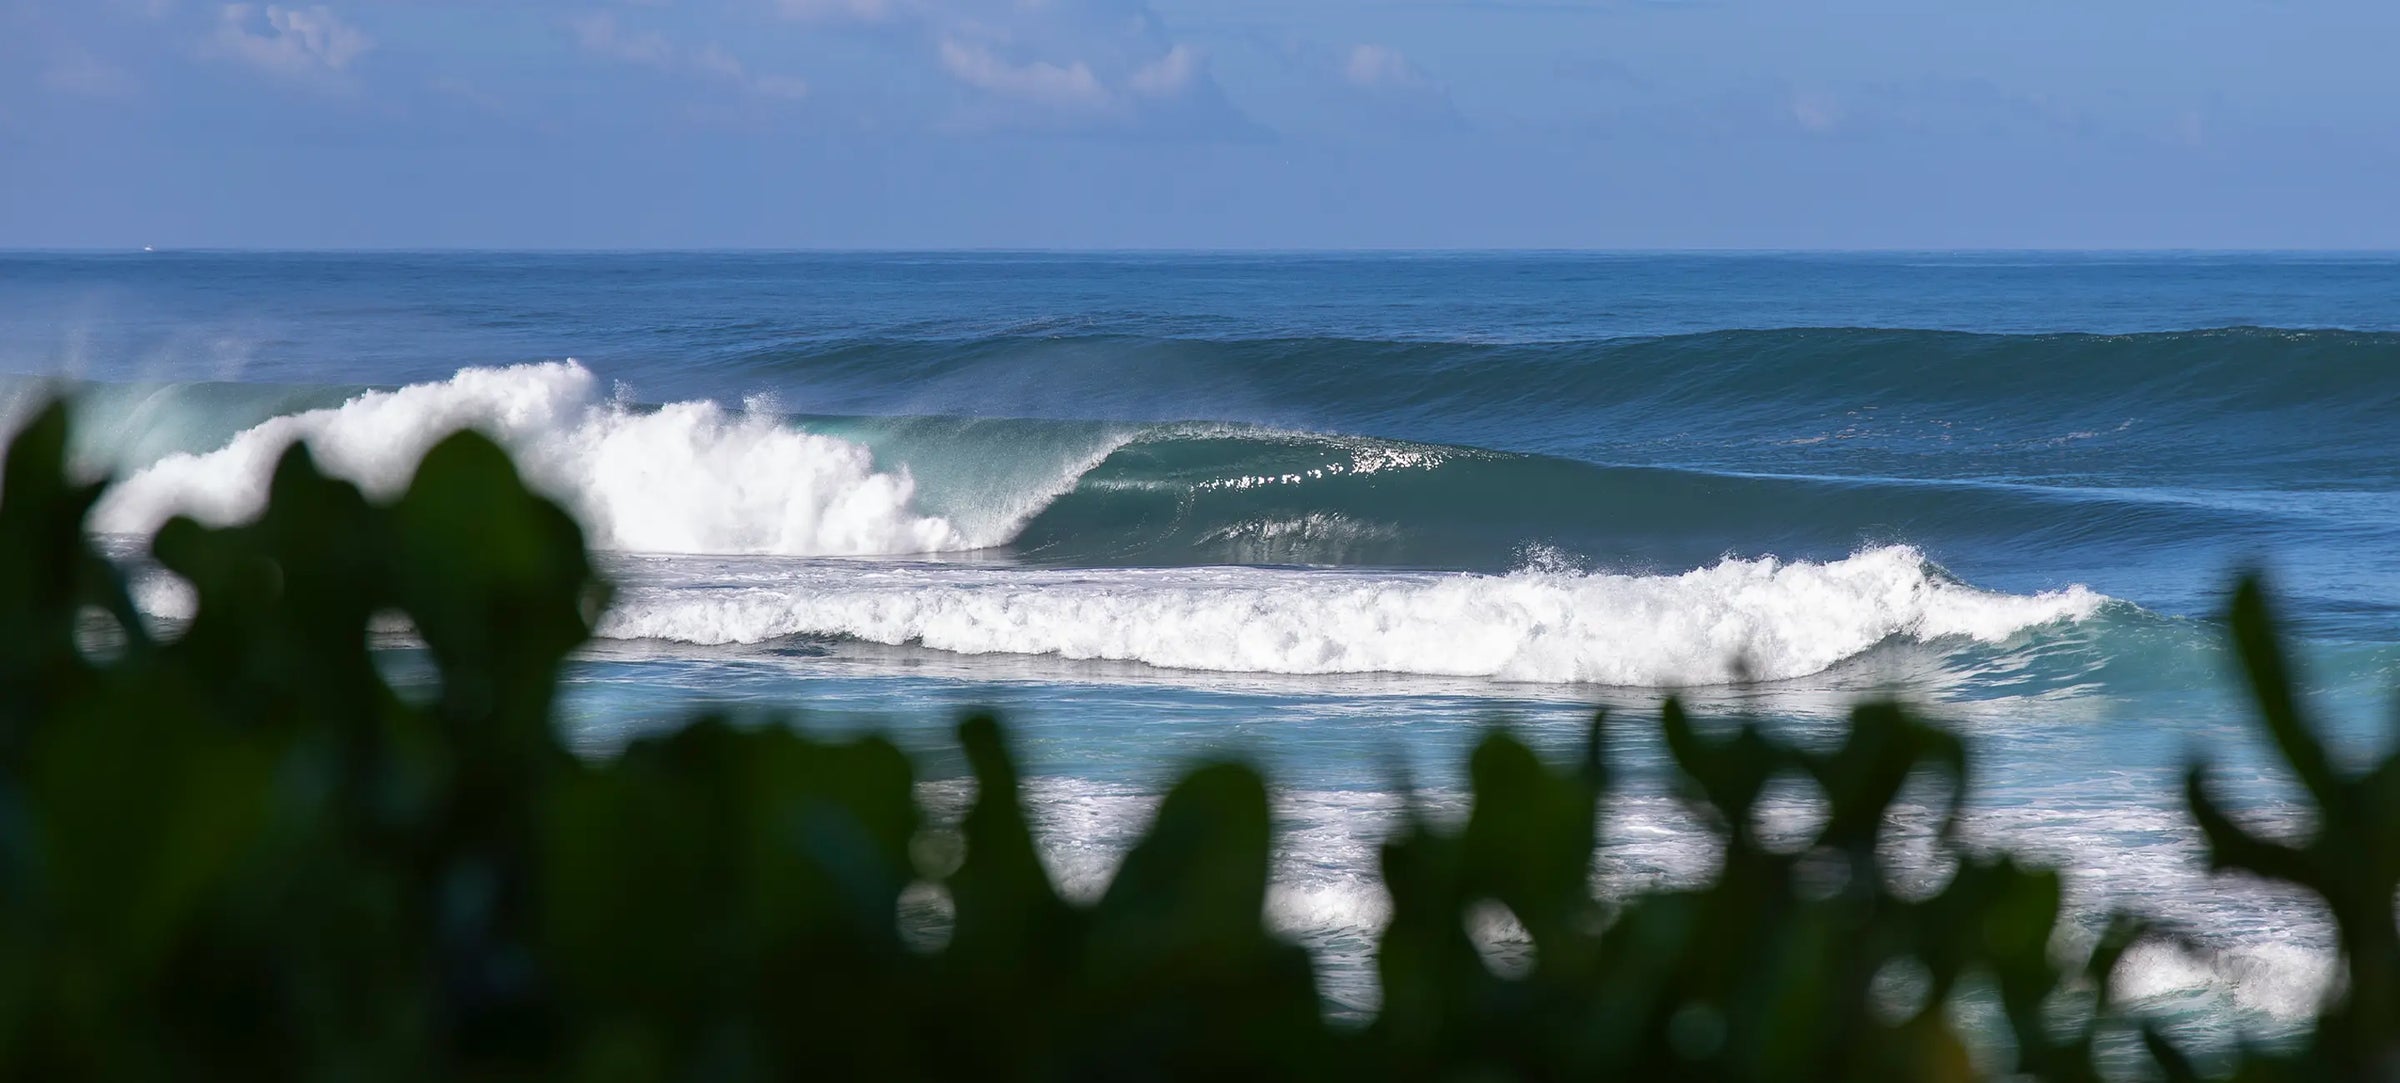 A perfect wave breaks at the Banzai Pipeline on Oahu's North Shore